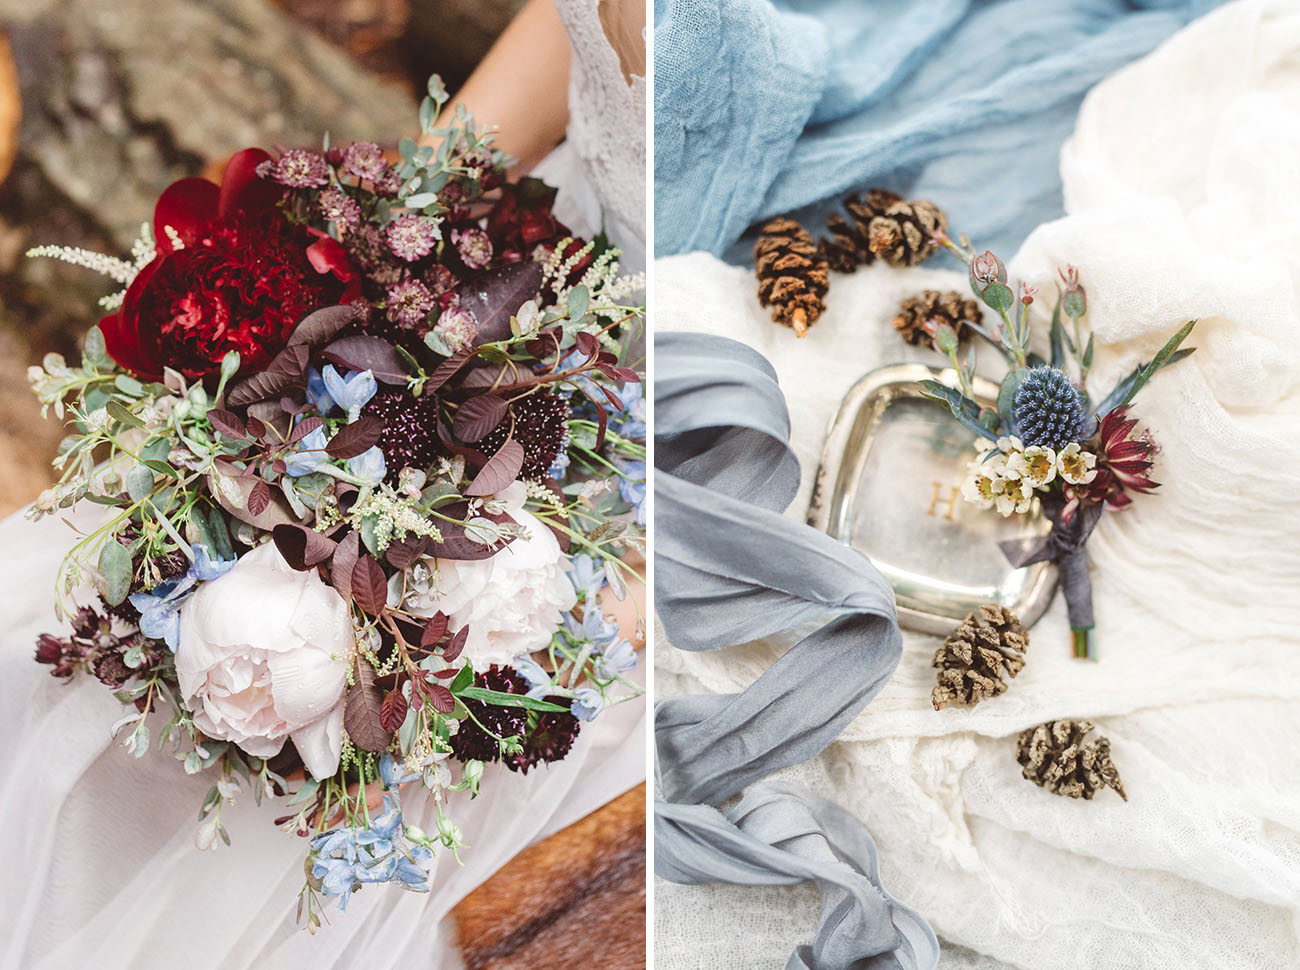 The bridal bouquet was done by the planners, and it looked so textural and forest like